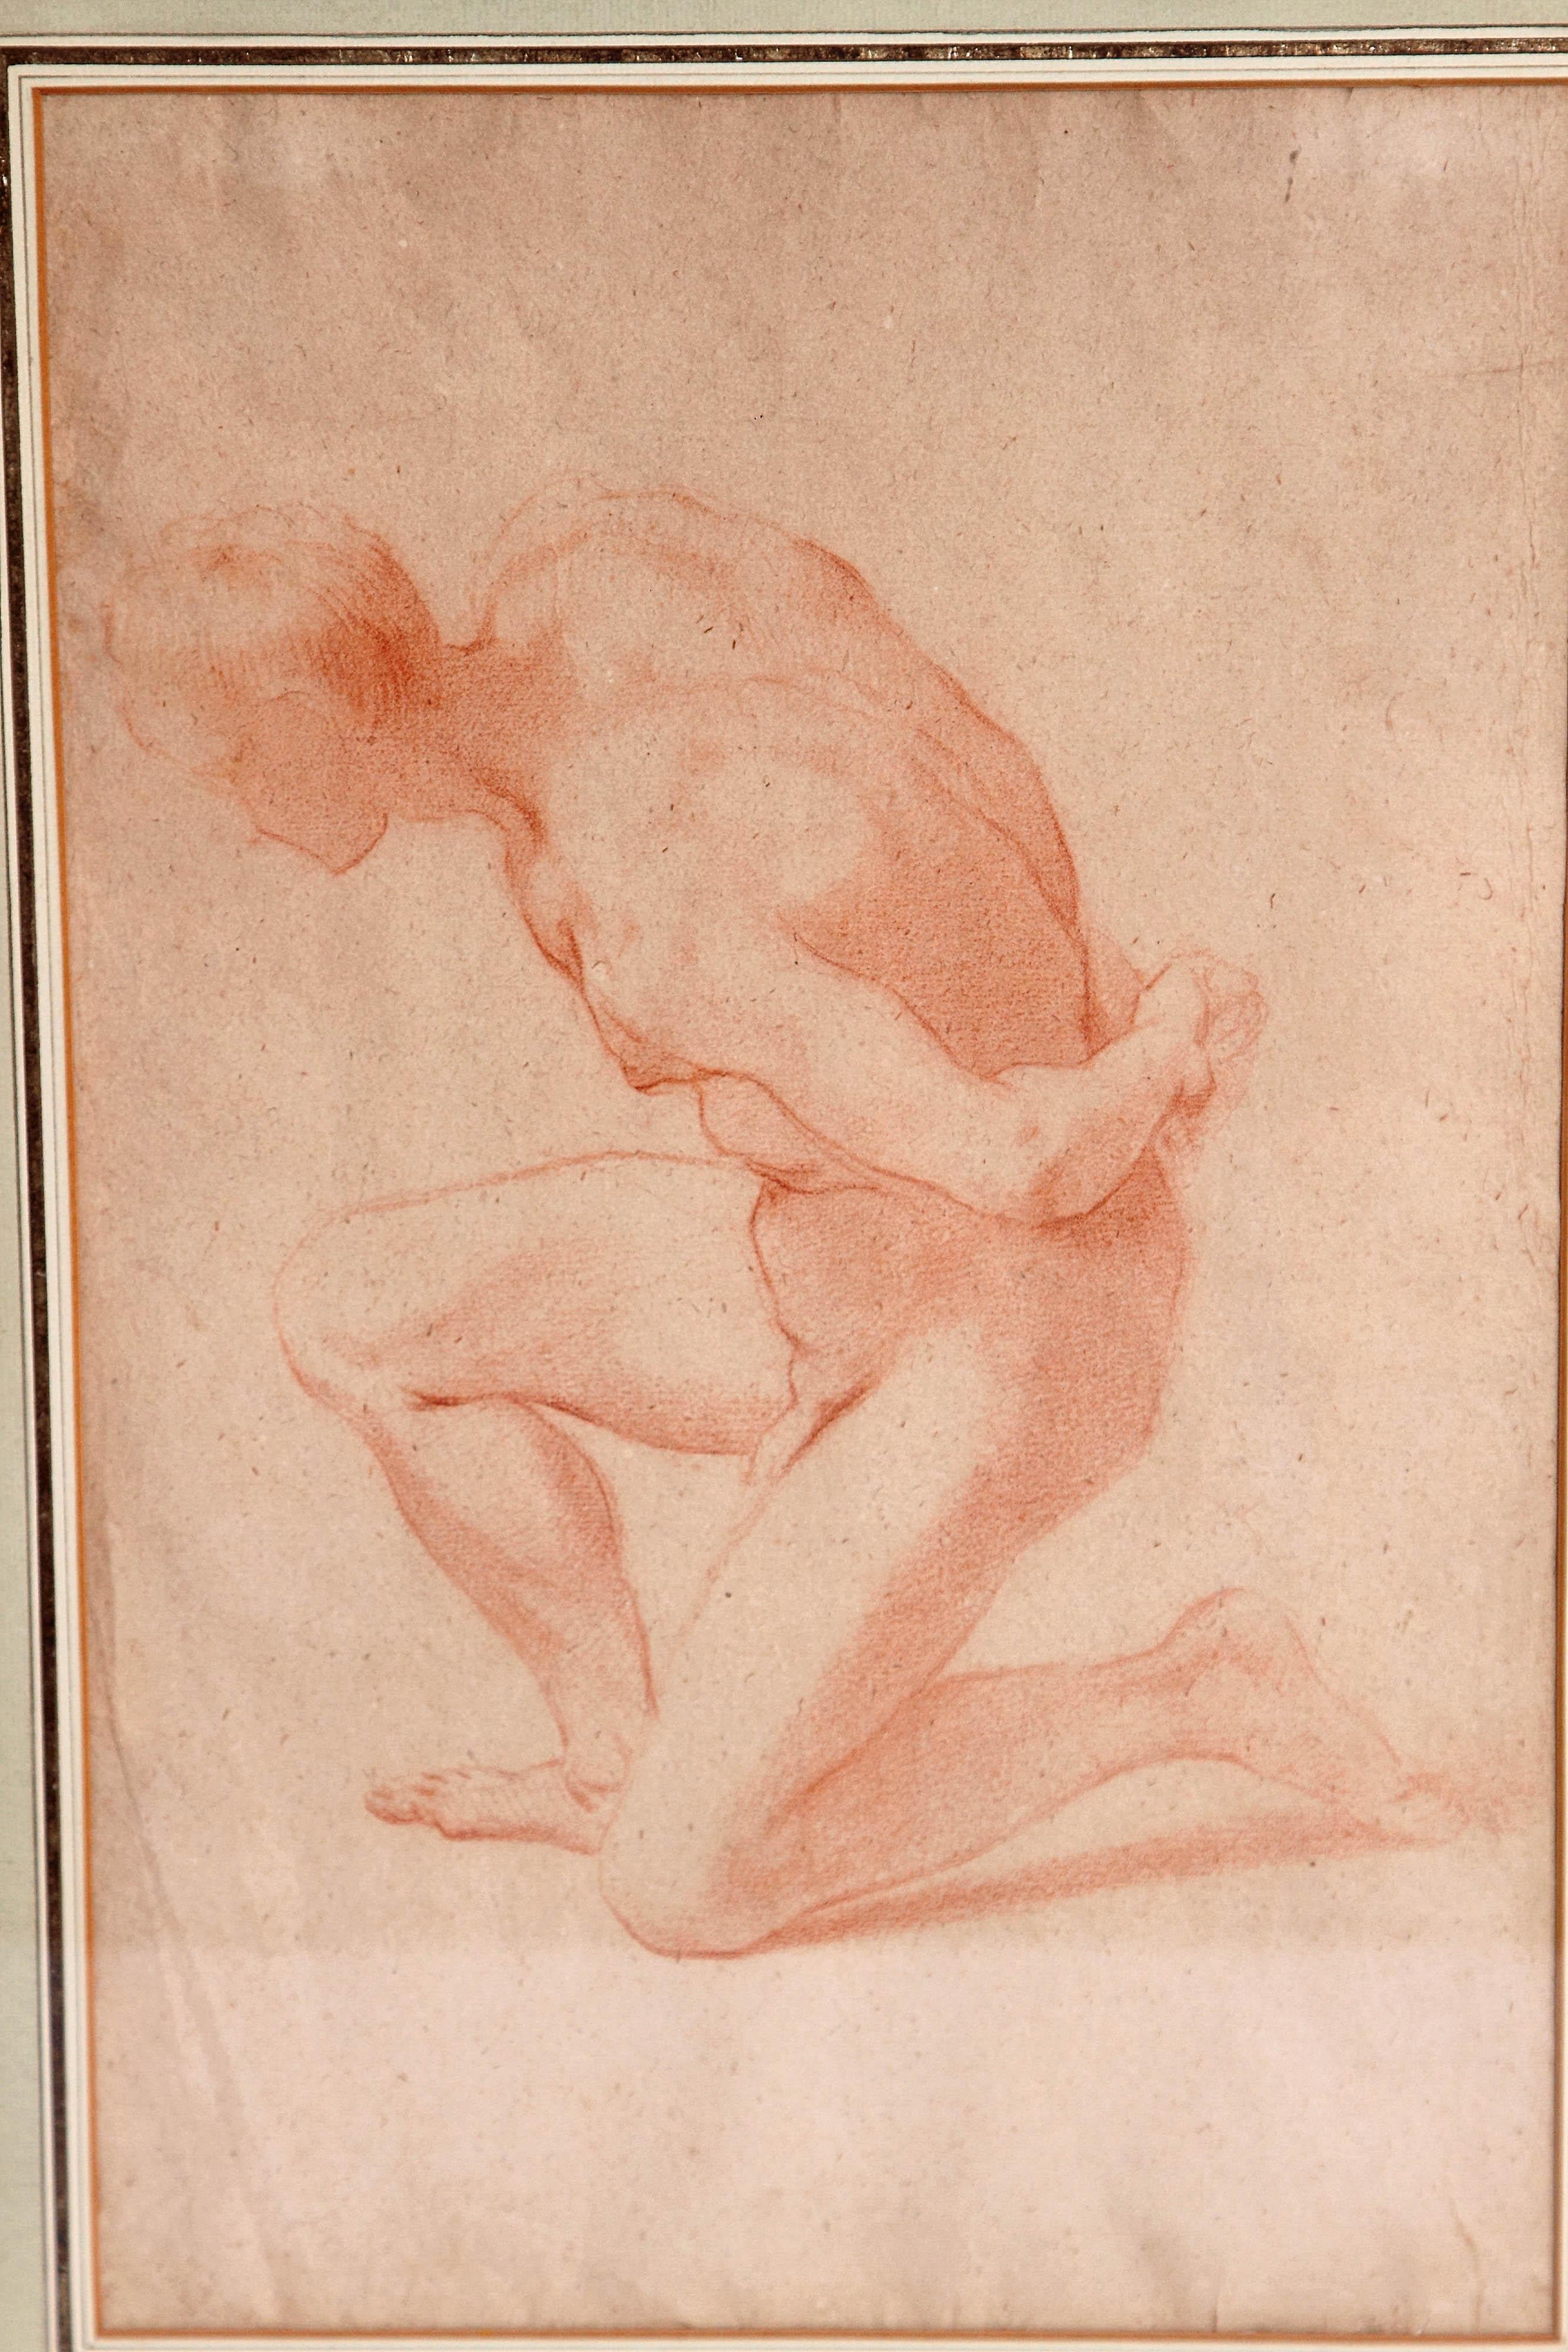 A realistically portrayed drawing of the male human figure kneeling with arms behind back. Modern matting and framed under conservation glass. Image measures 10.5